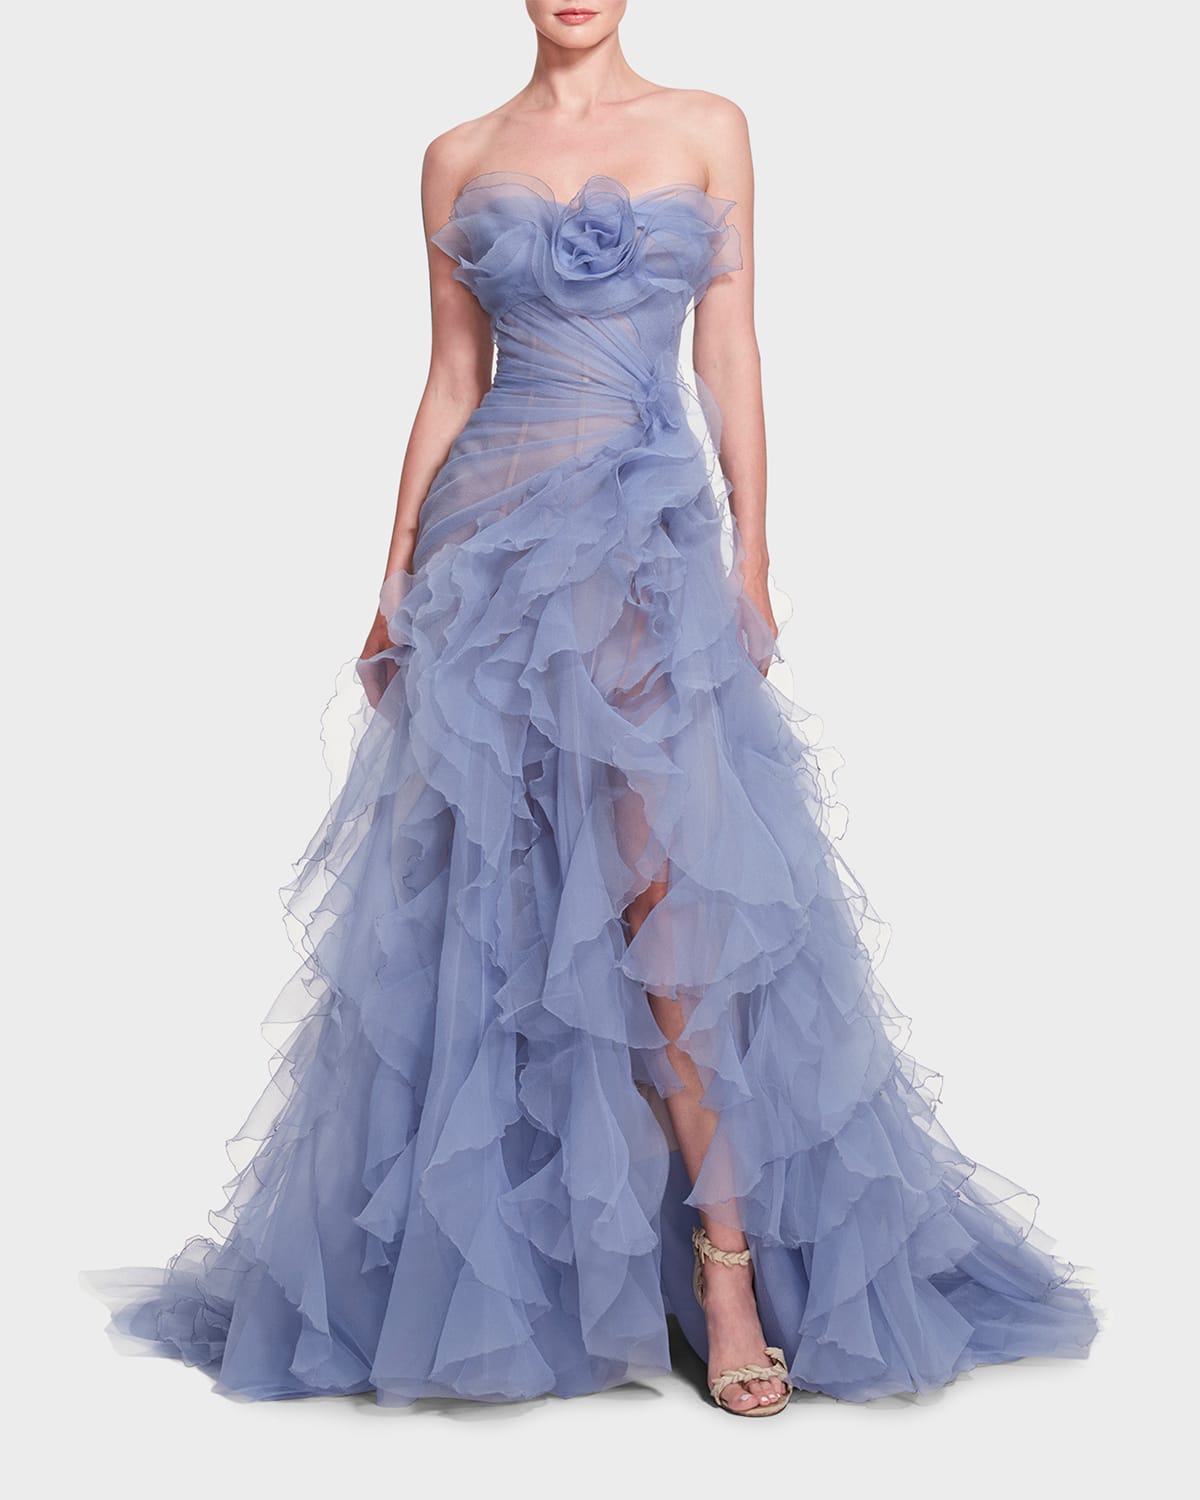 MARCHESA TEXTURED ORGANZA BALL GOWN WITH FLORAL DRAPED DETAILS